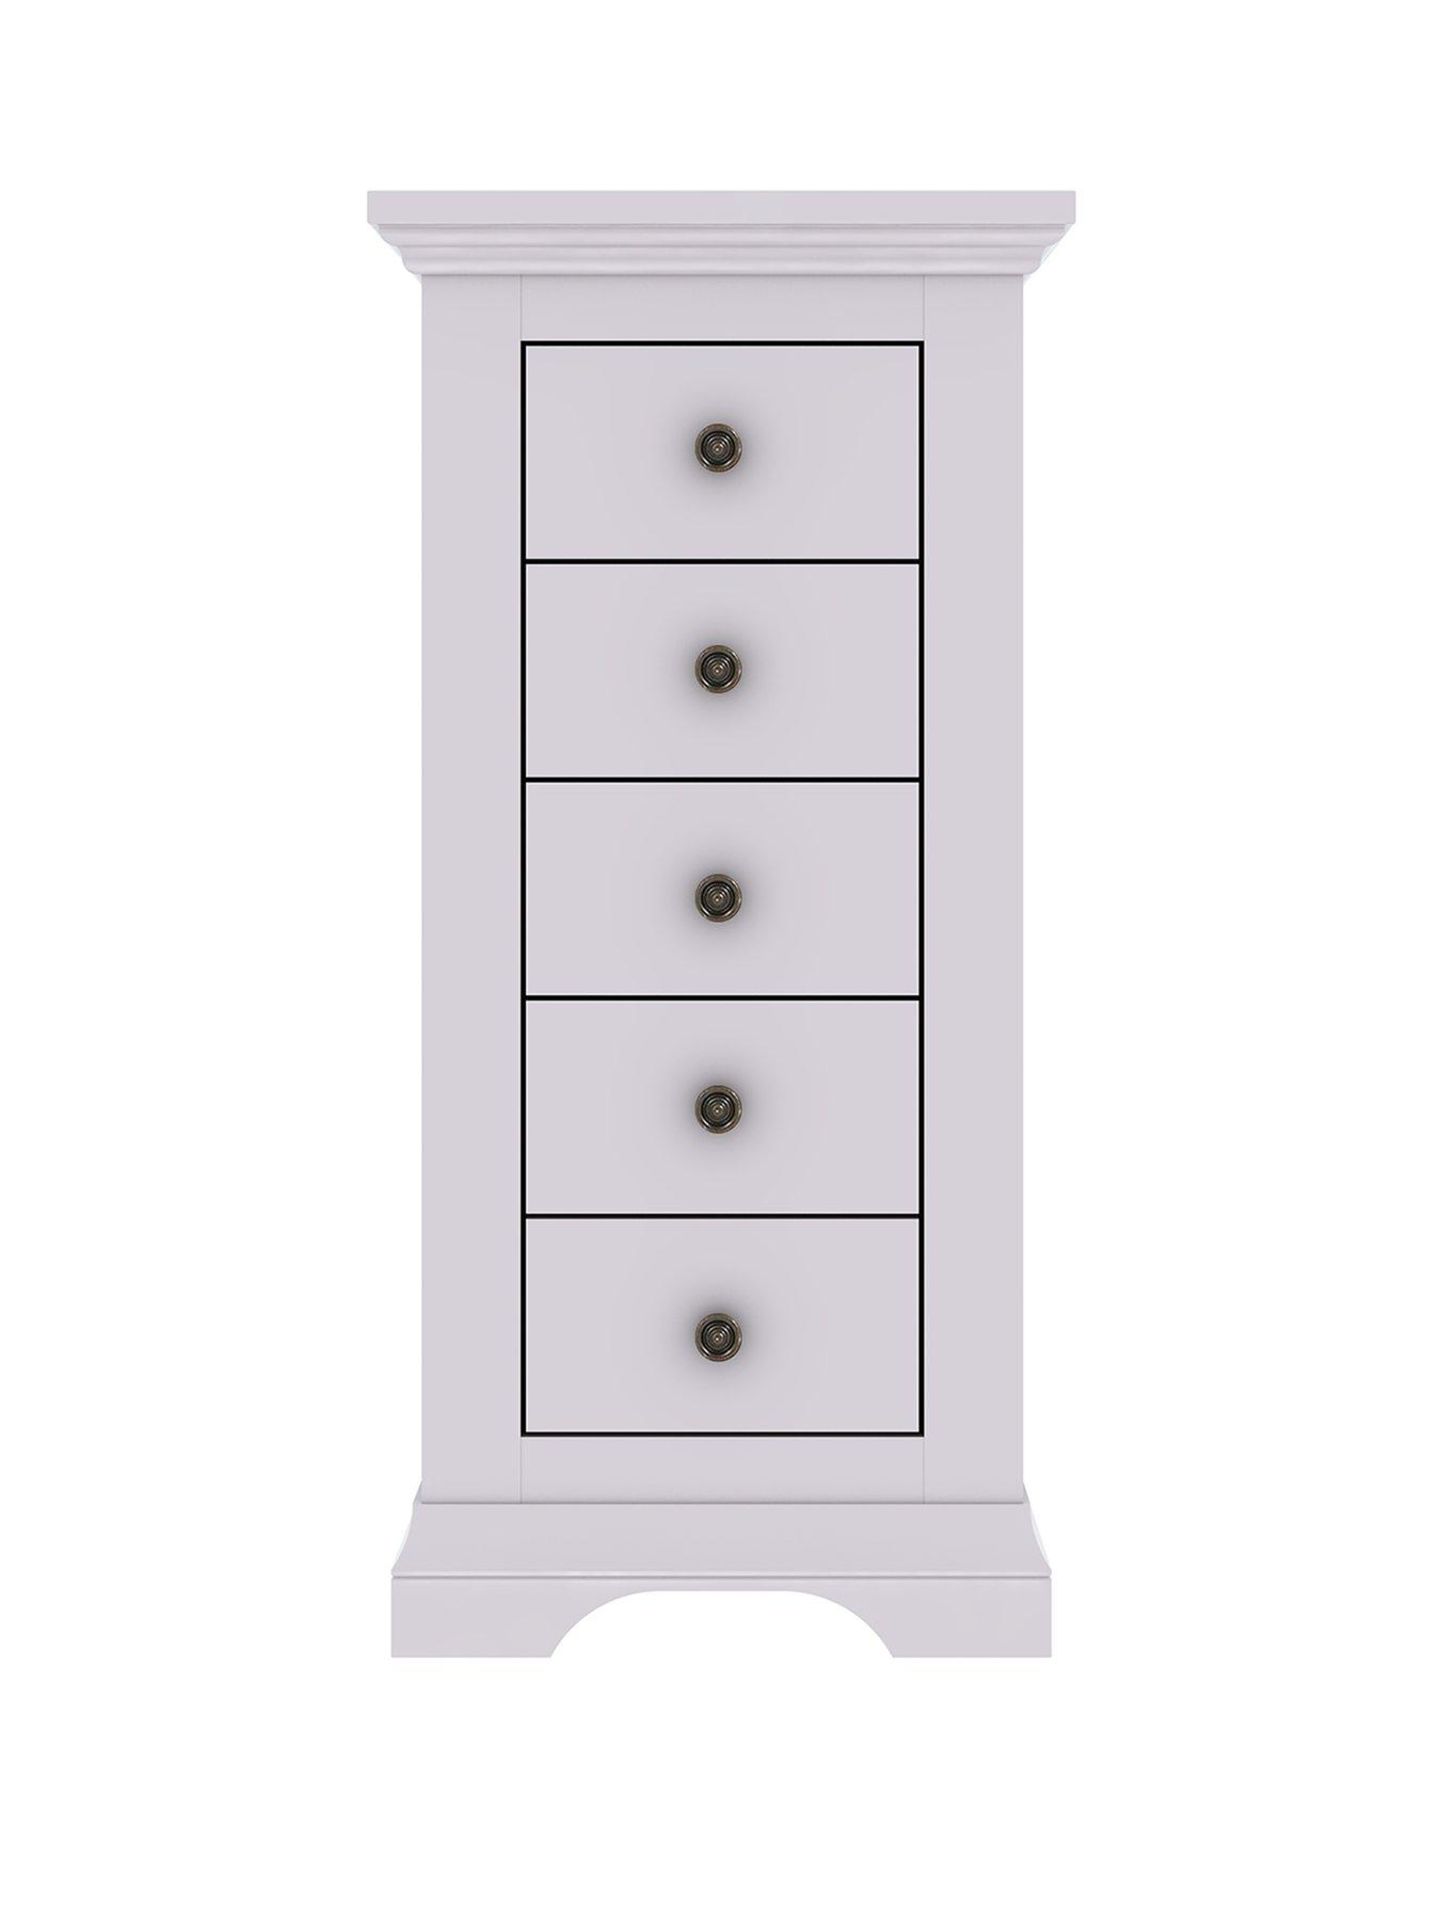 Boxed Item Ideal Home Normandy 5 Drawers Solid Oak Narrow Chest [Grey] 117X53X41Cm Rrp:£378.0